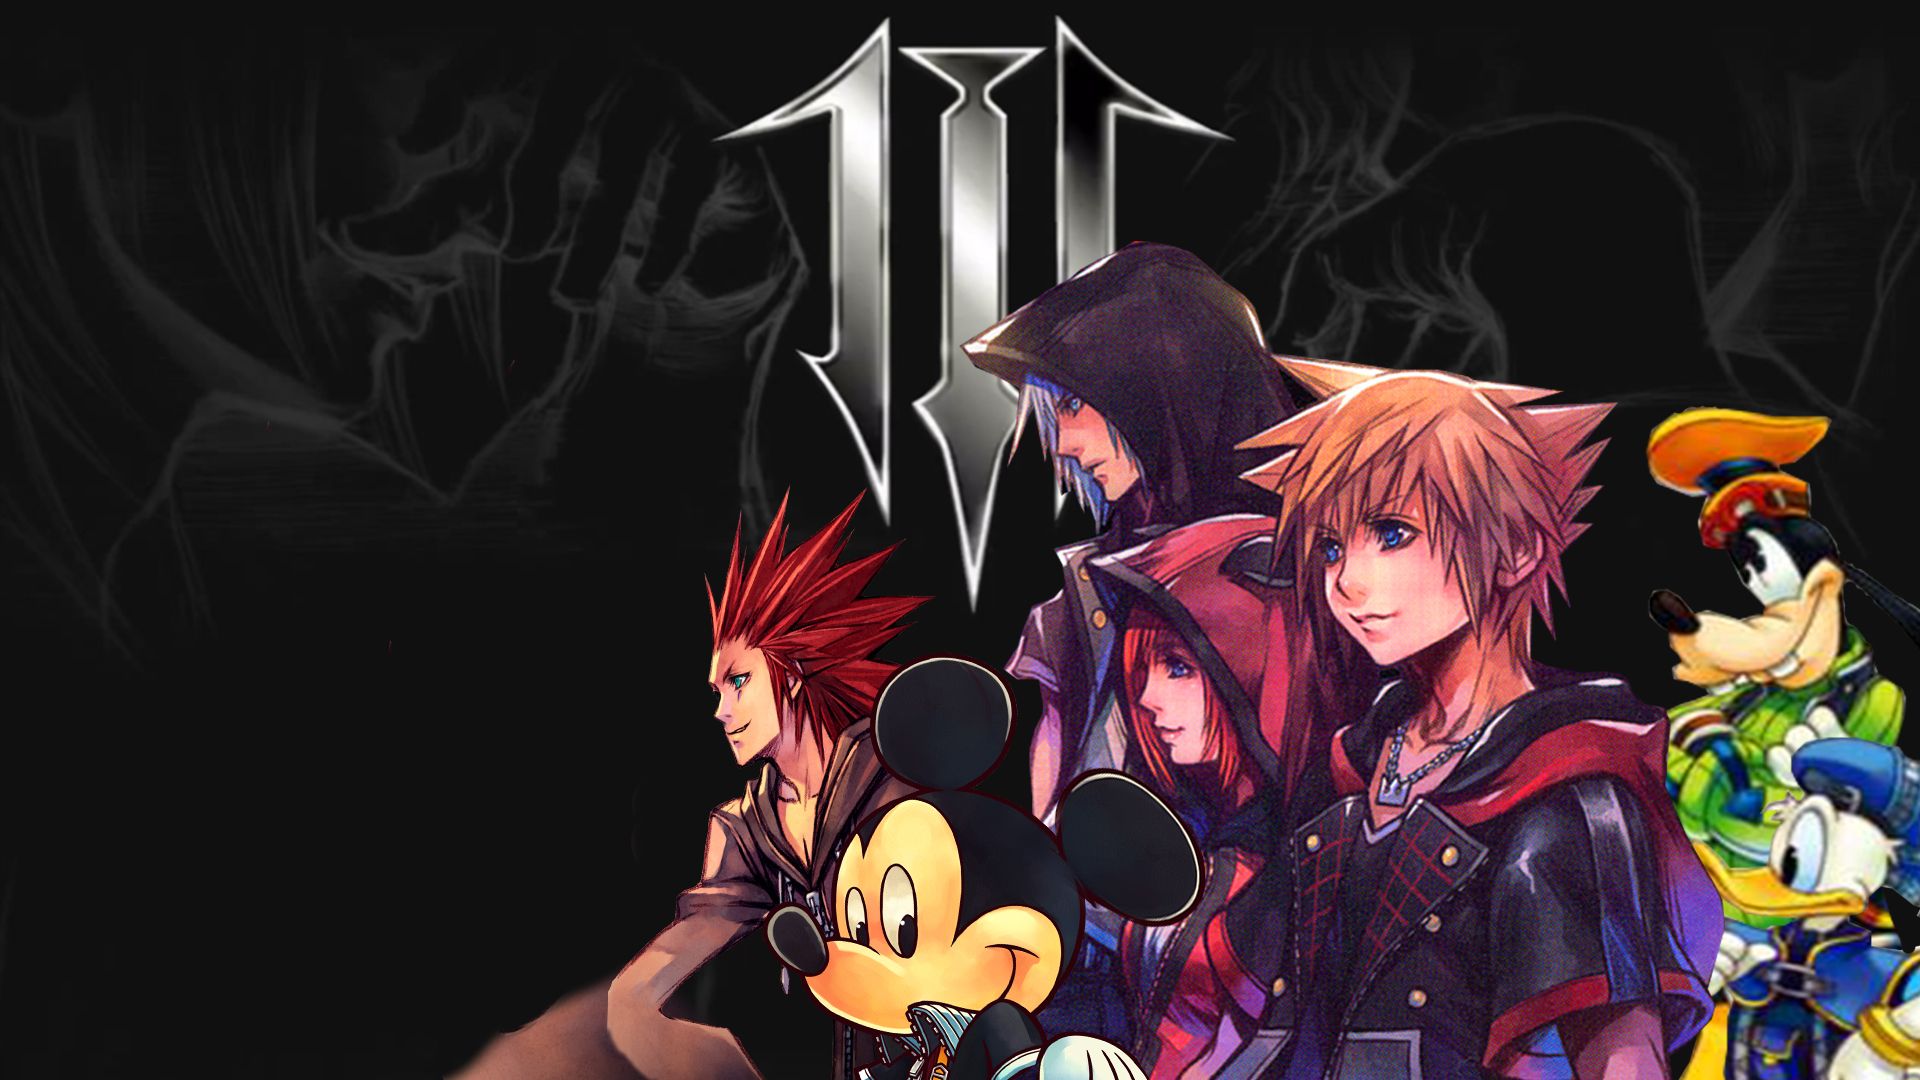 Kingdom Hearts Iii Wallpapers Hd And A Little Overview Visual Arts Ideas